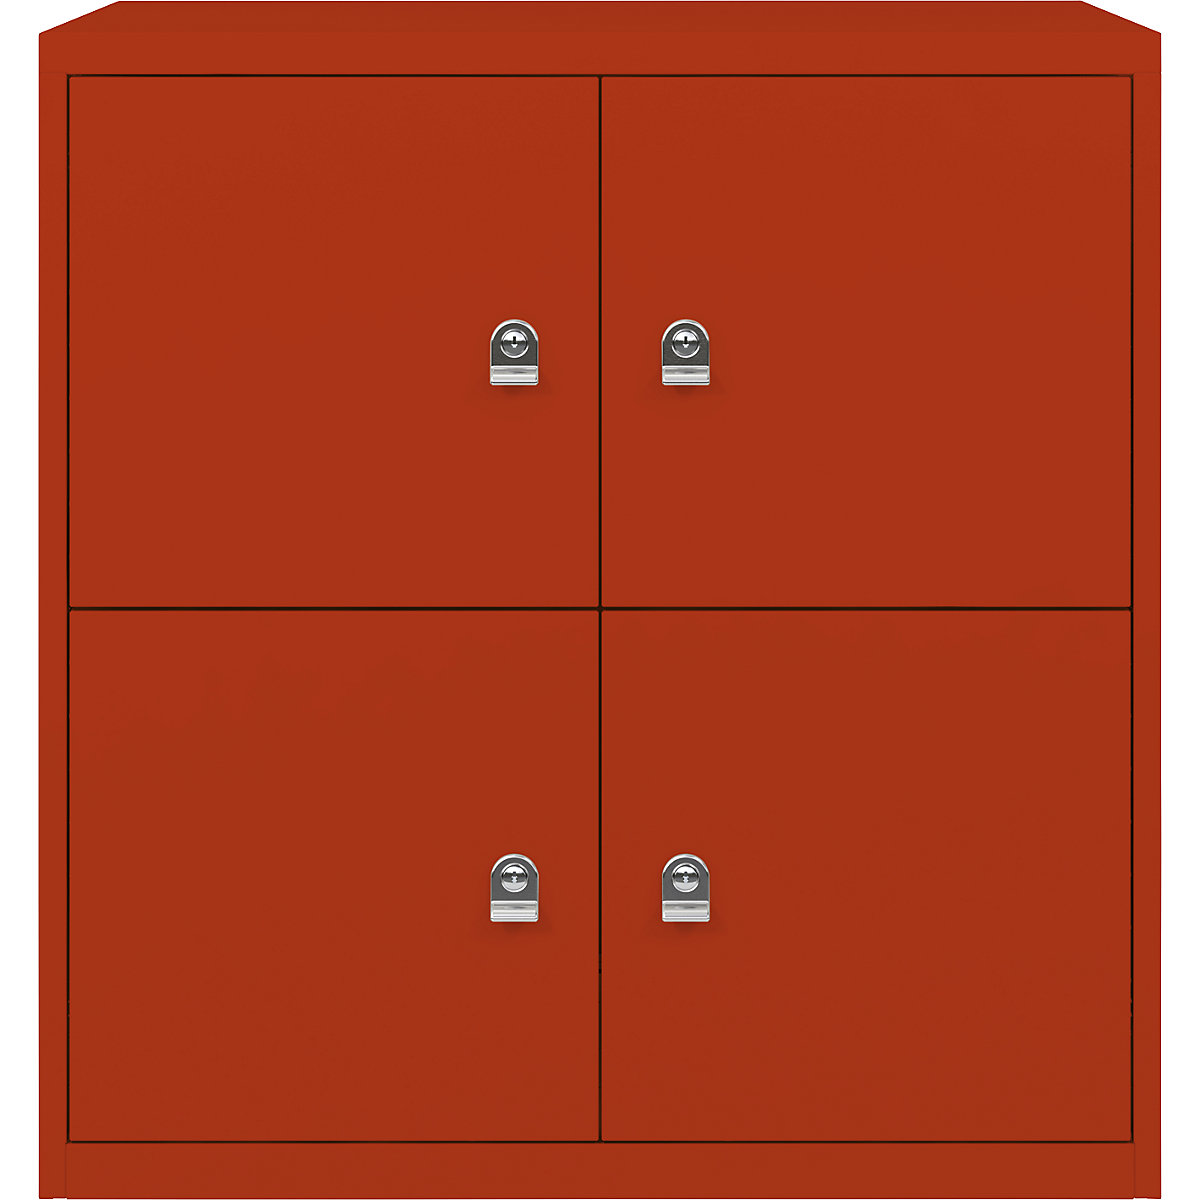 LateralFile™ lodge – BISLEY, with 4 lockable compartments, height 375 mm each, sevilla